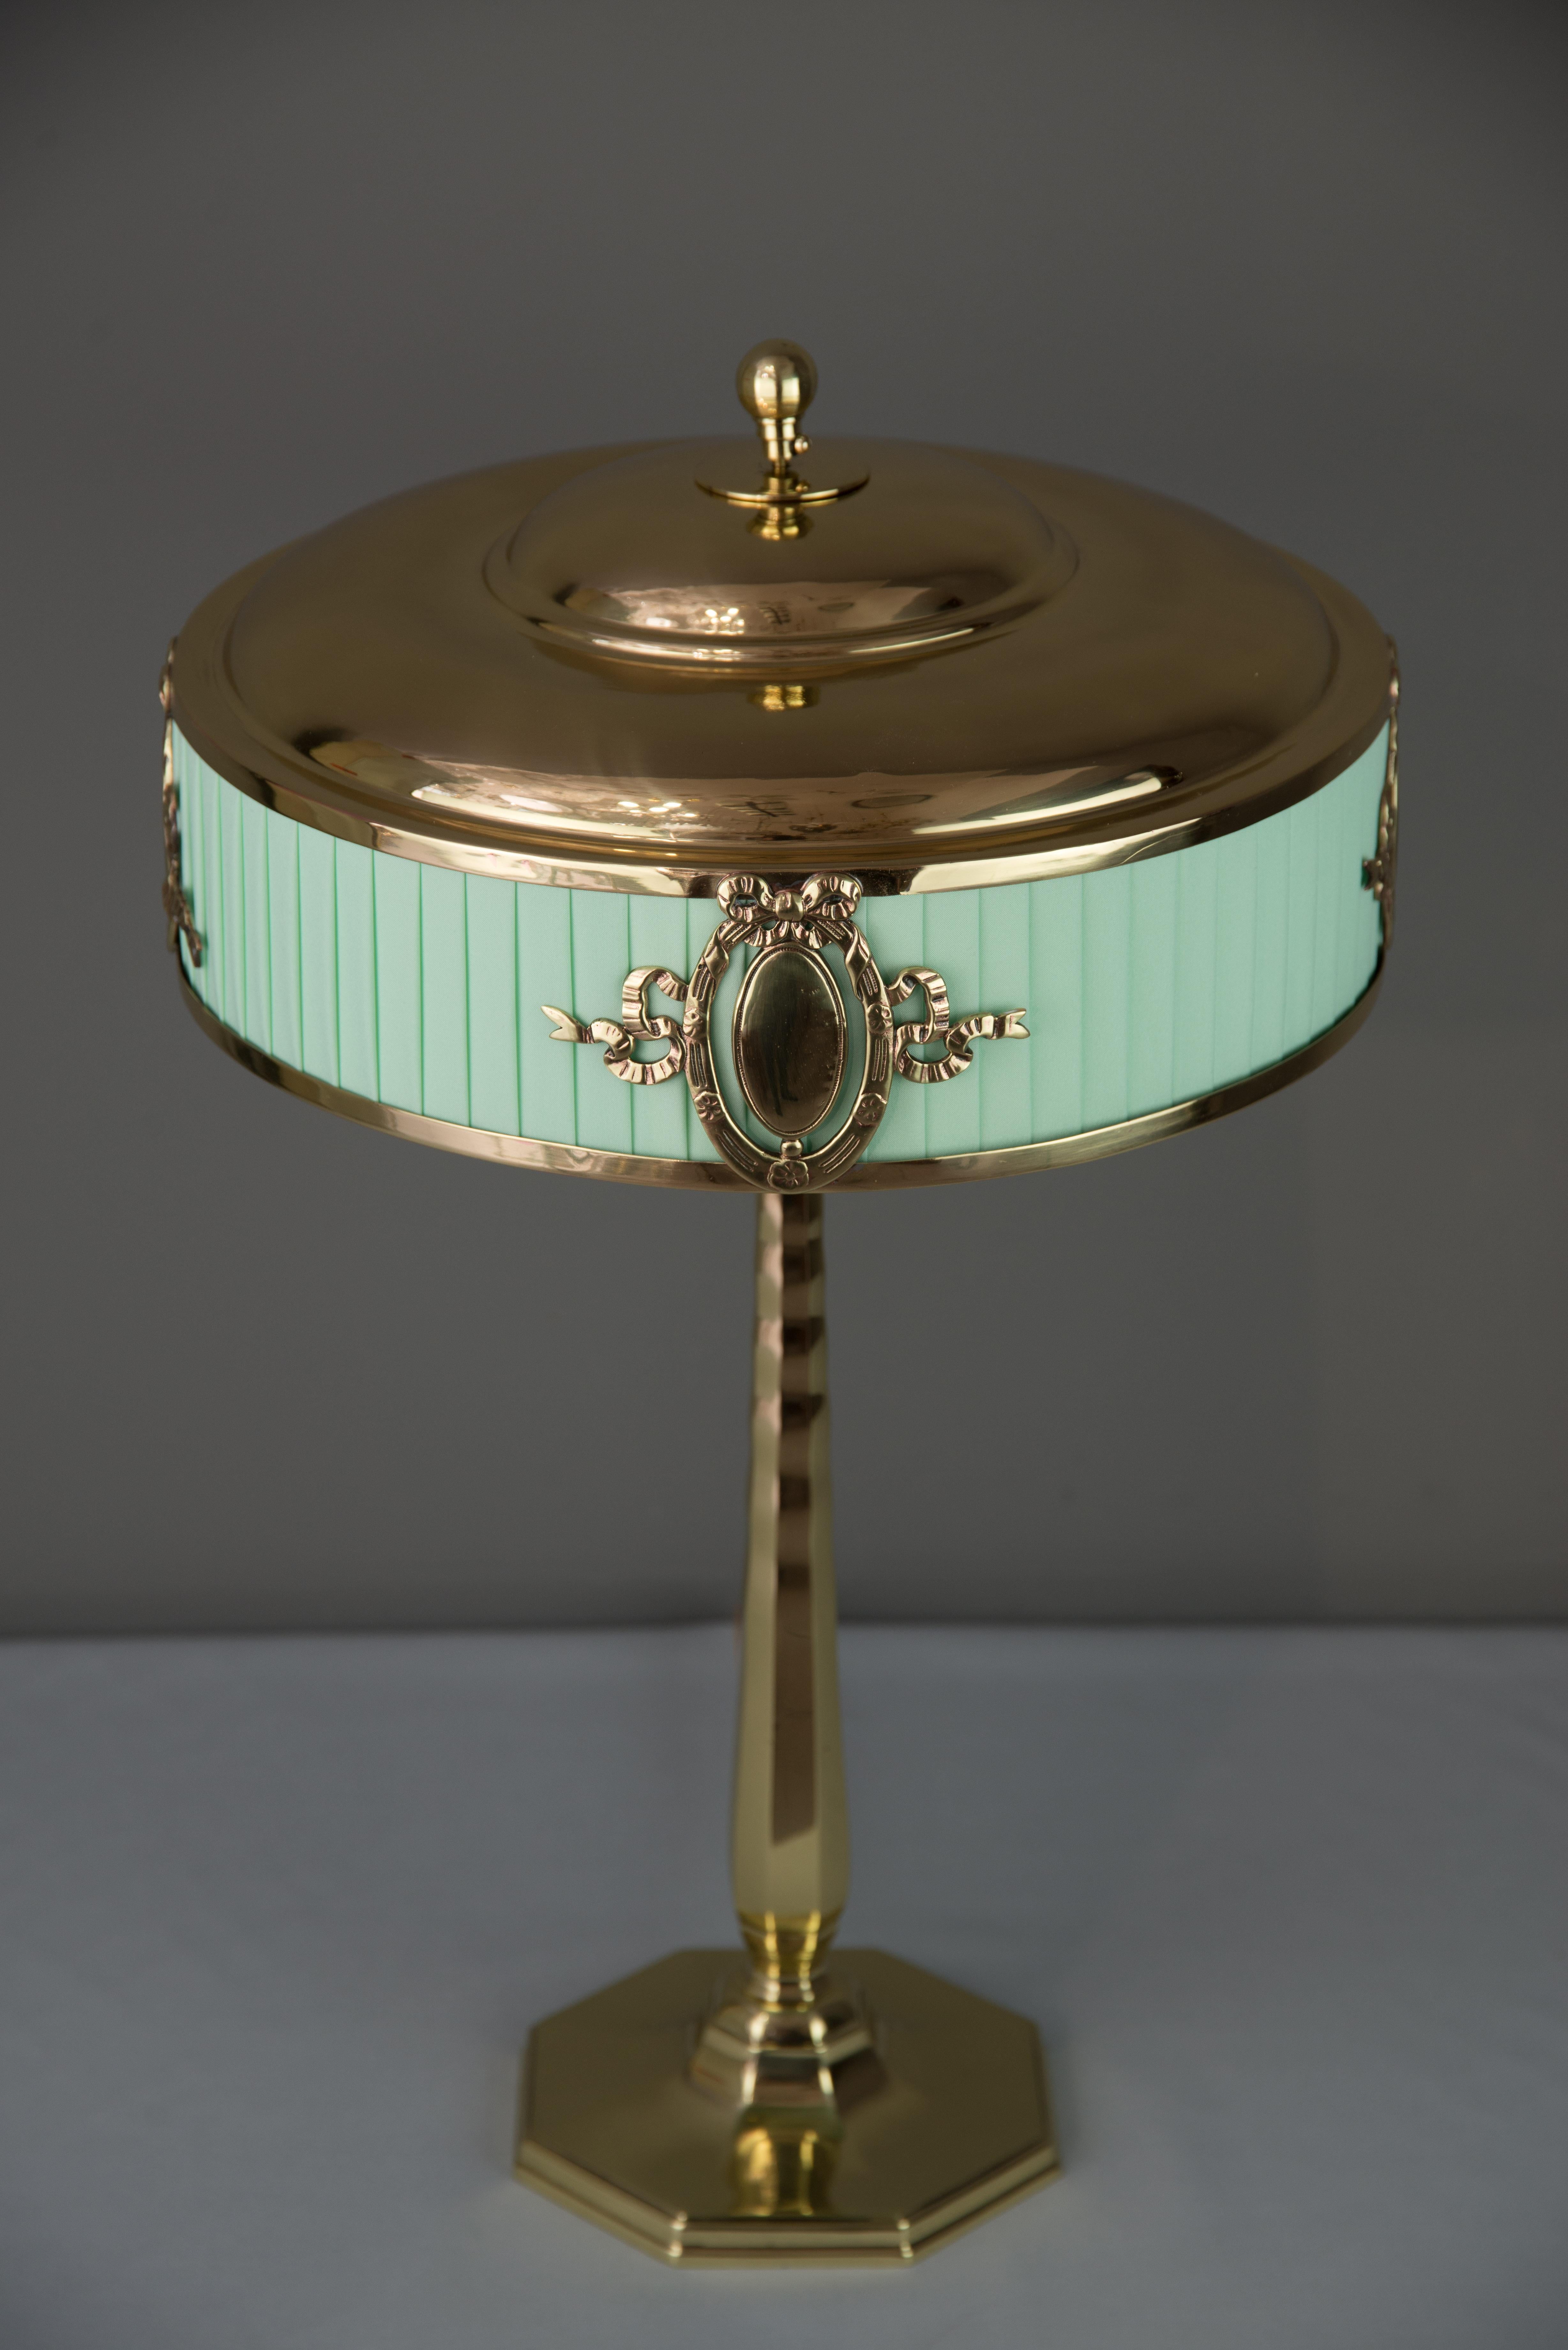 Solid Jugendstil table lamp, circa 1908
Polished and stove enameled
The green fabric is replaced (new).